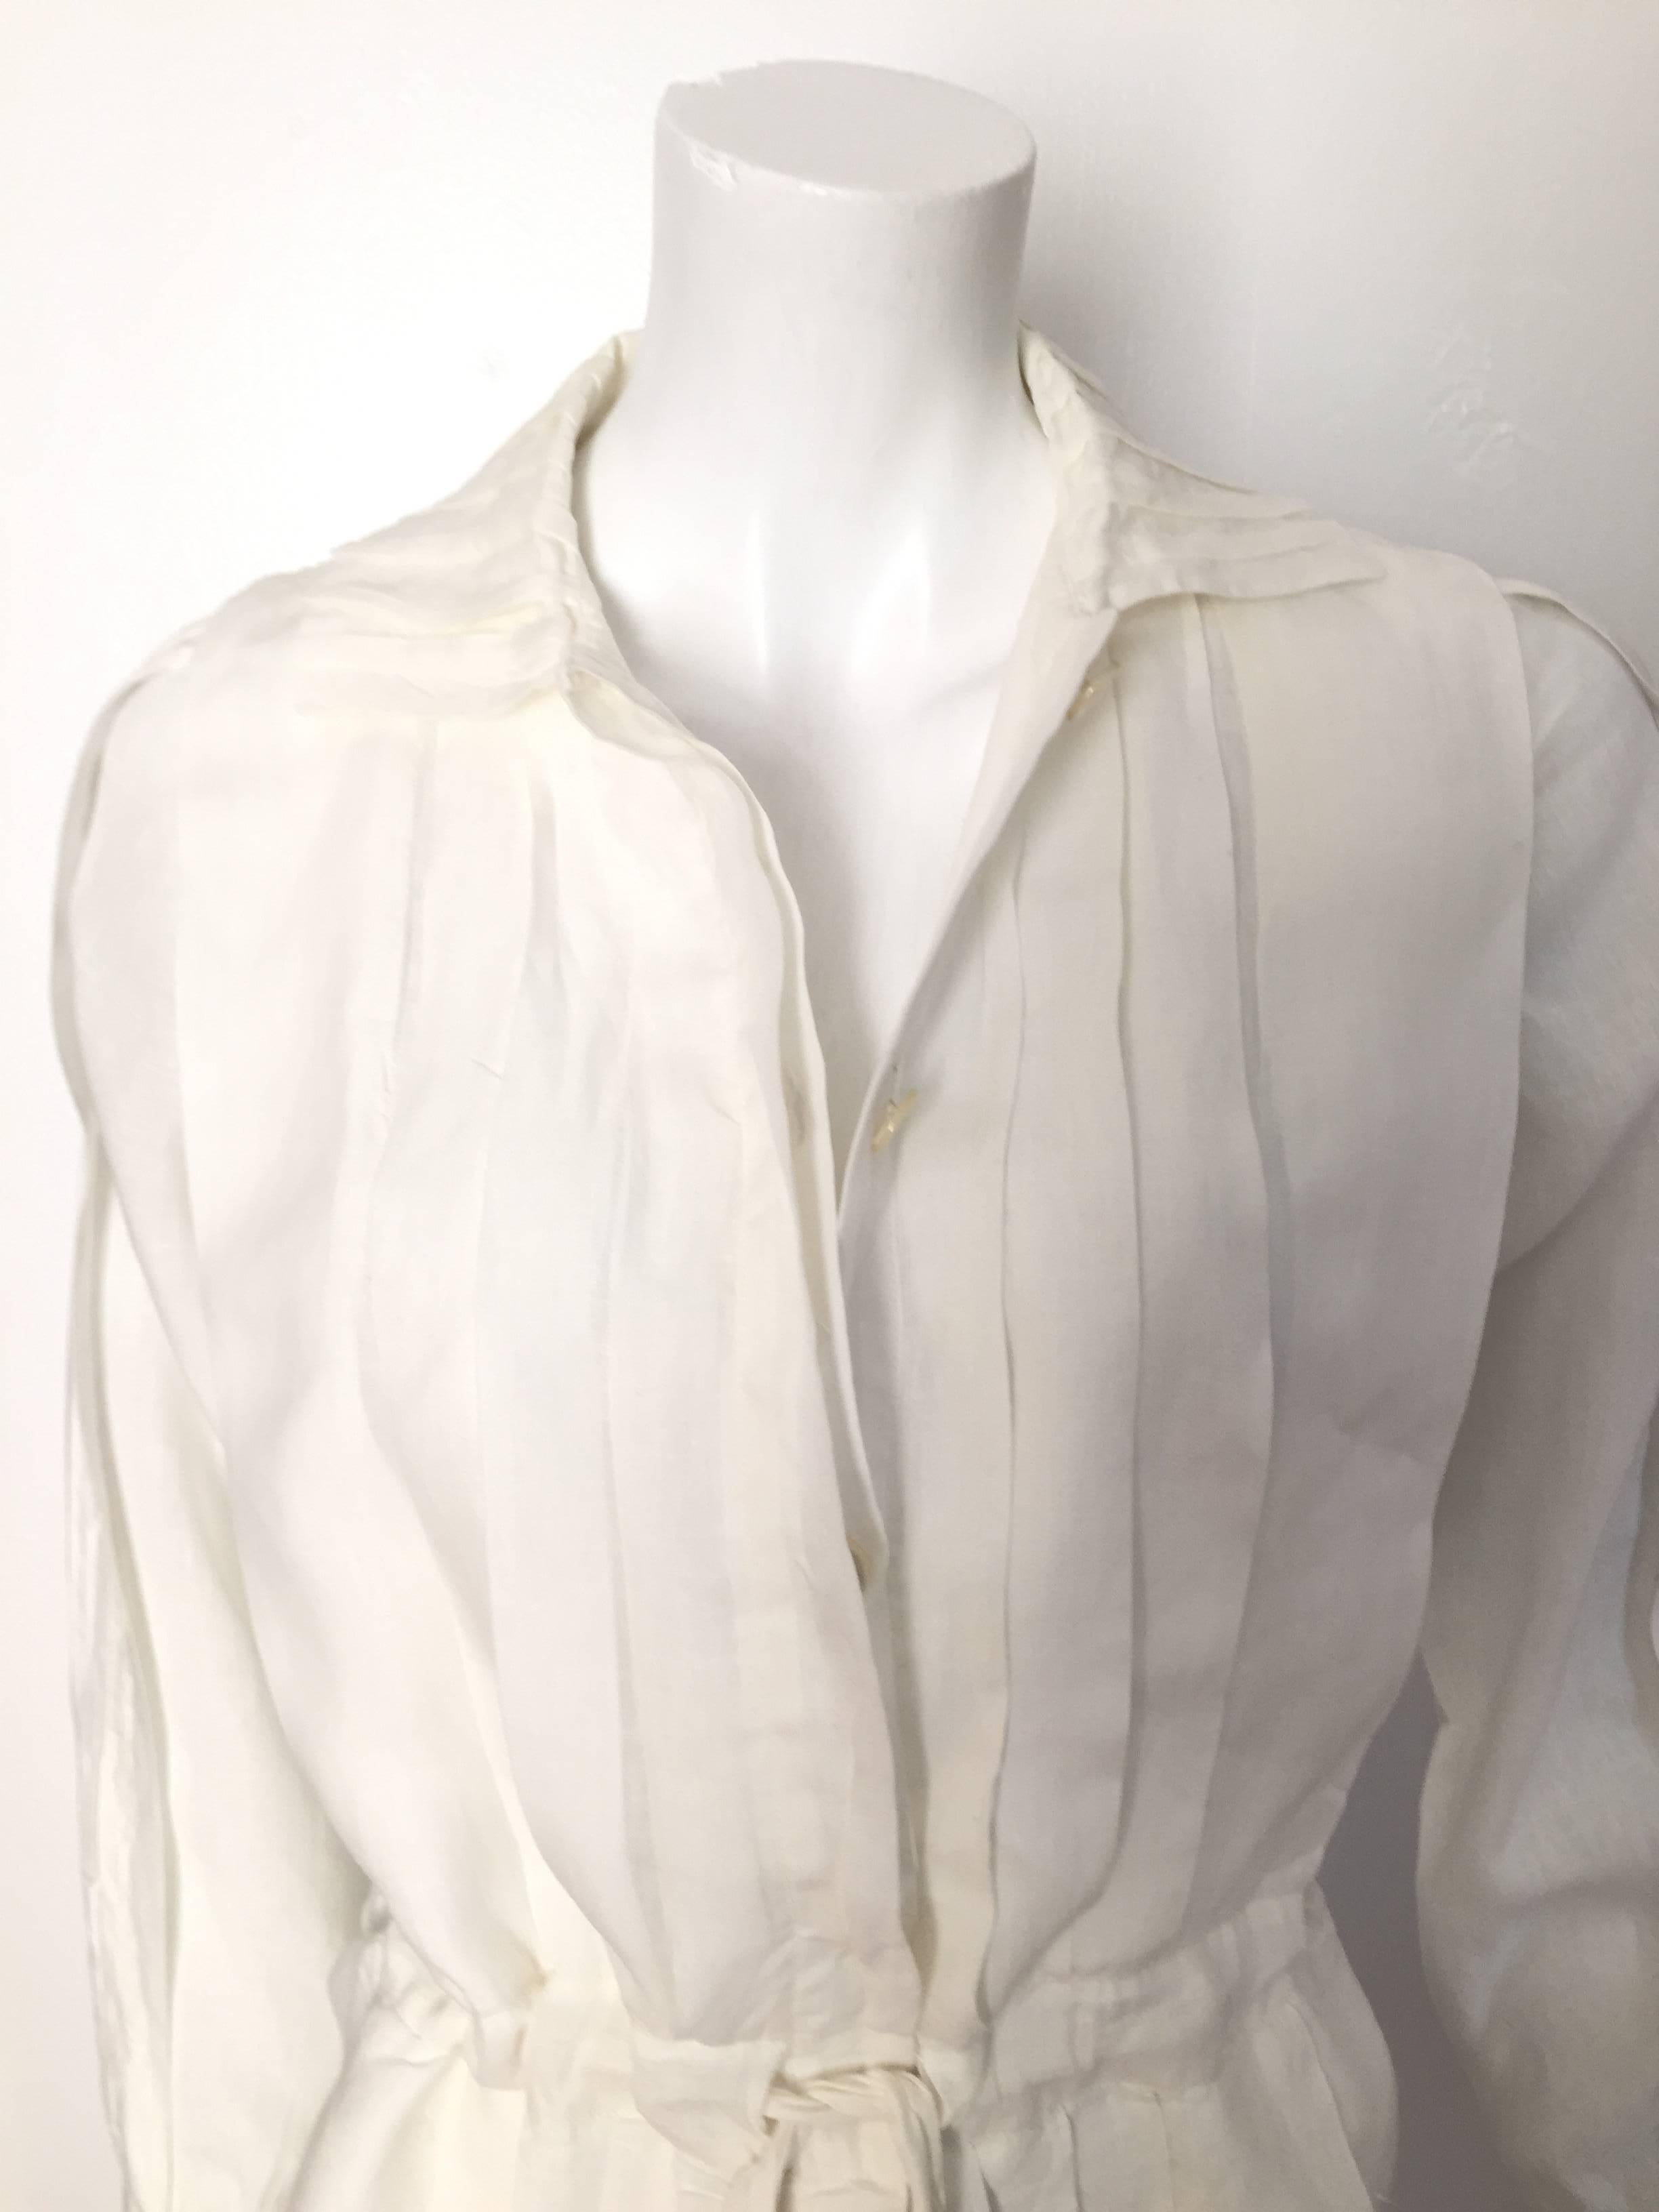 Laura Biagiotti for Bonwit Teller 1980s white linen pleated button up dress with draw string at waistline is an Italian size 40 and fits like a modern USA size 4 / 6 but please see & use the measurements below so you can properly measure your body.